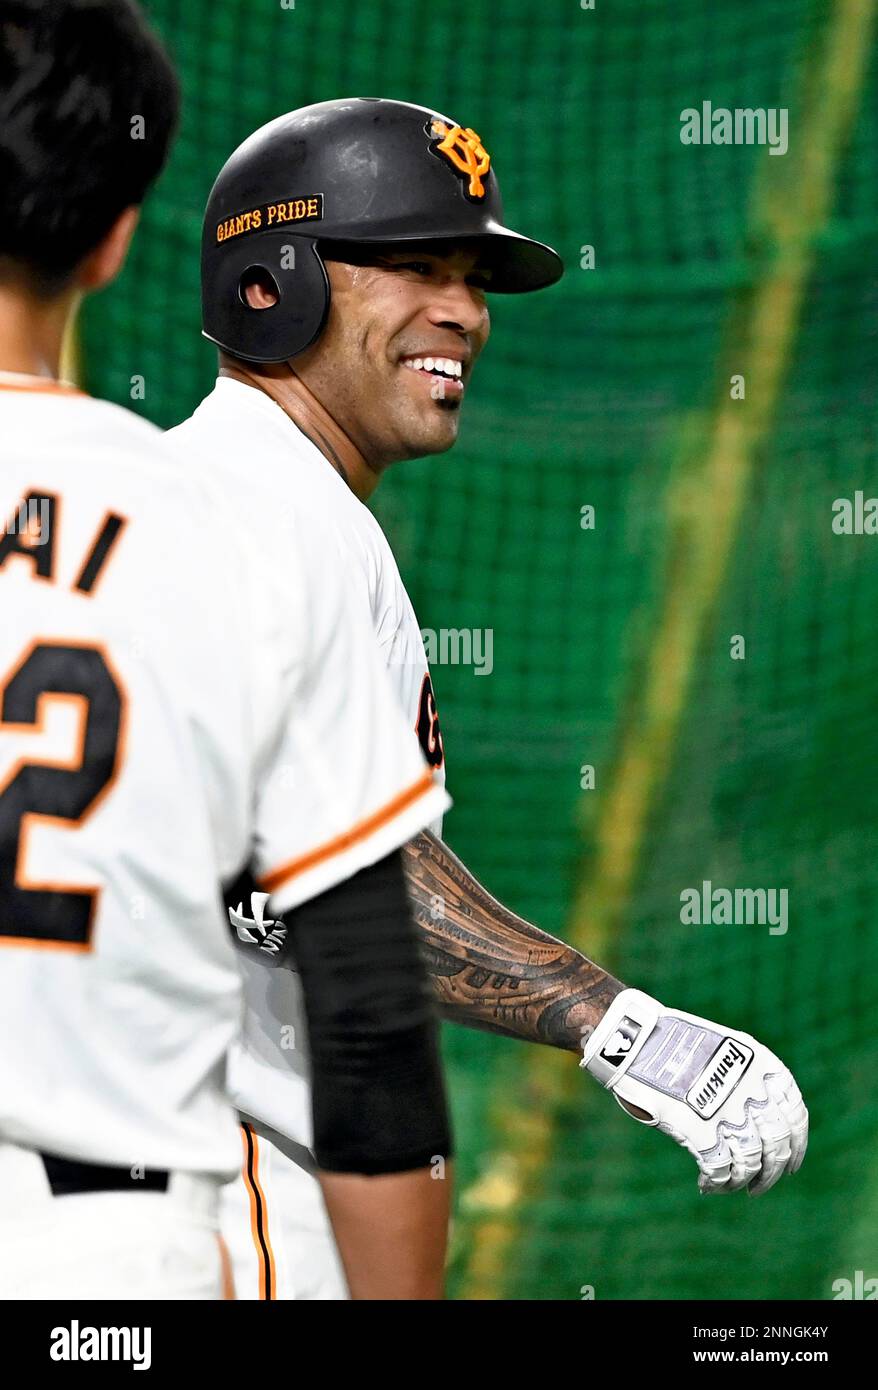 Eric Thames who joined Yomiuri Giants of Nippon Professional Baseball (NPB) practices at Tokyo Dome in Tokyo on April 13, 2021